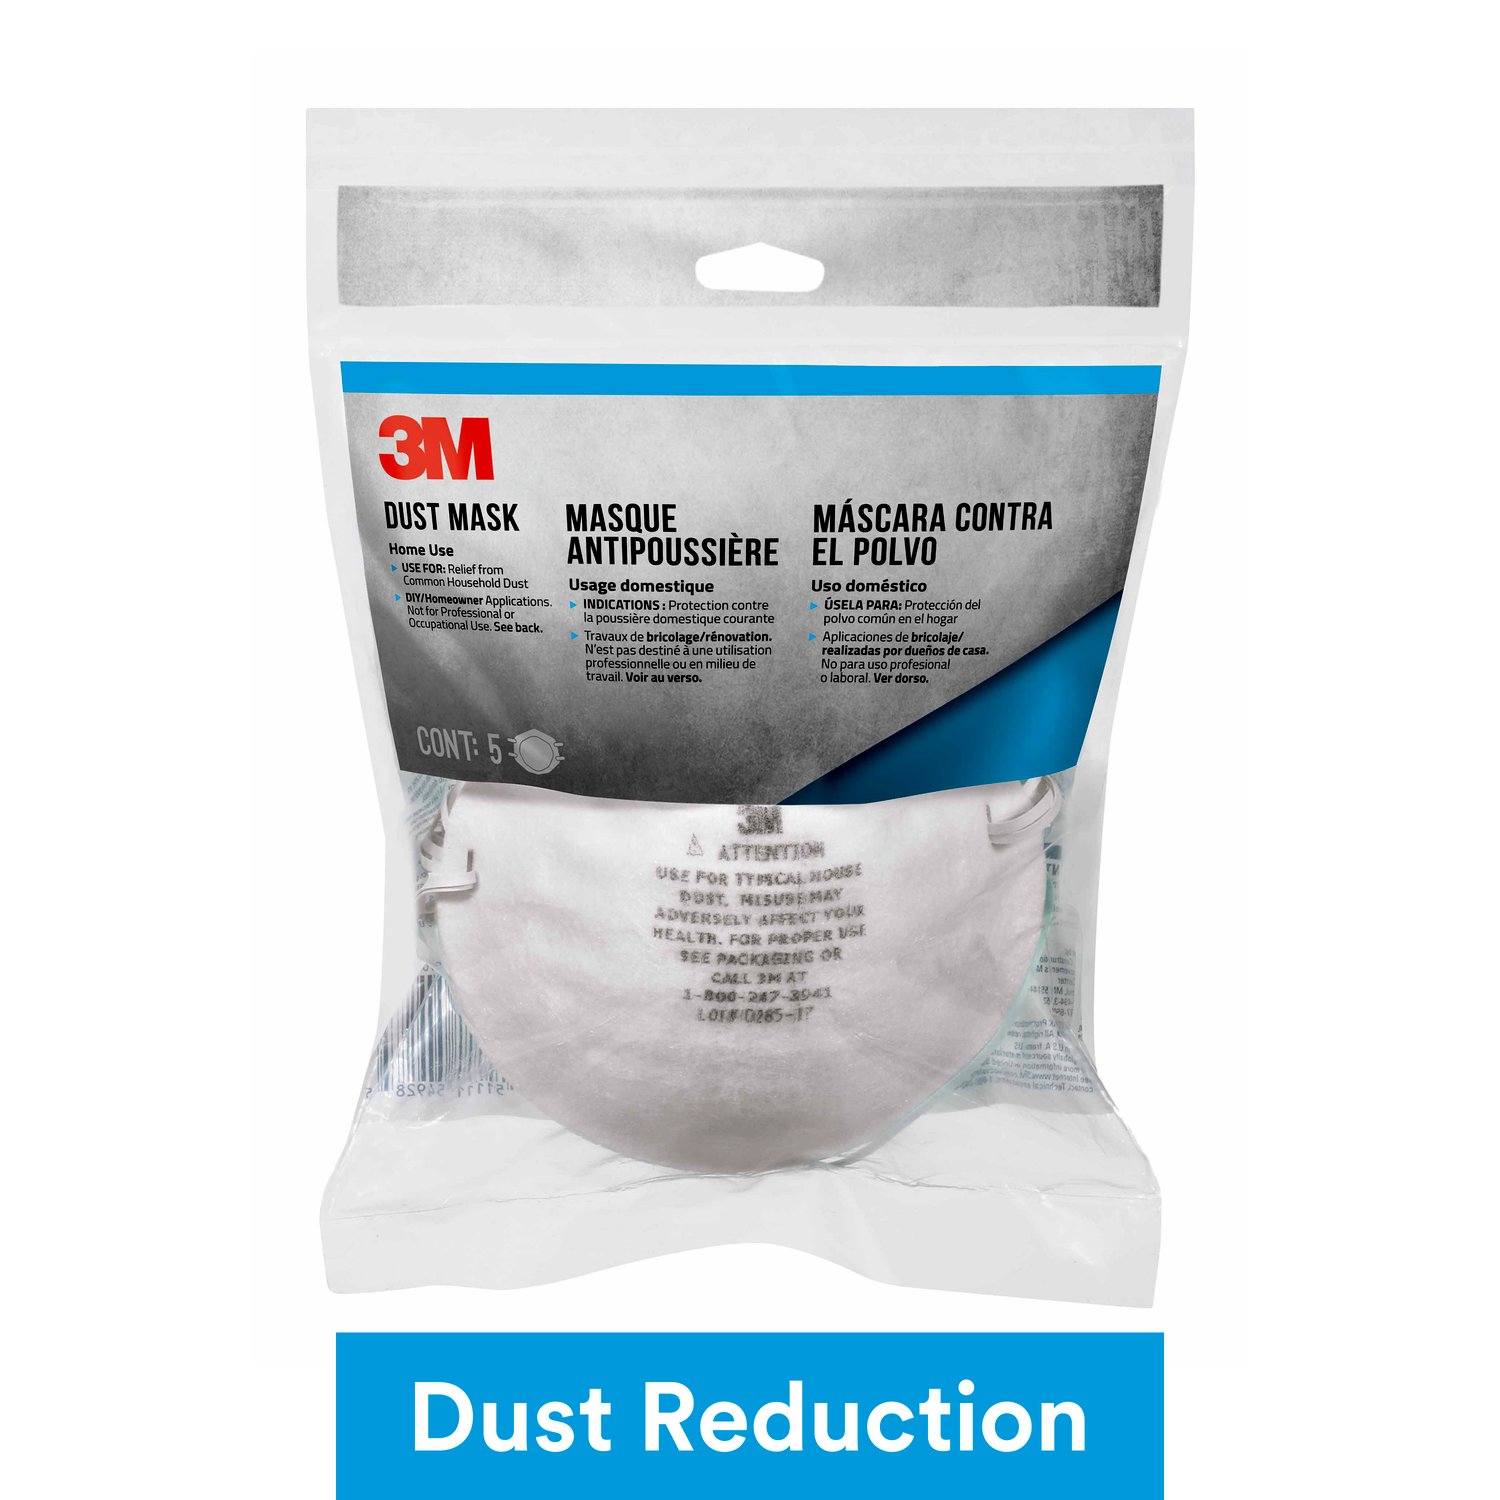 7100159226 - 3M Home Dust Mask 8661P5-DC, 5 eaches/pack